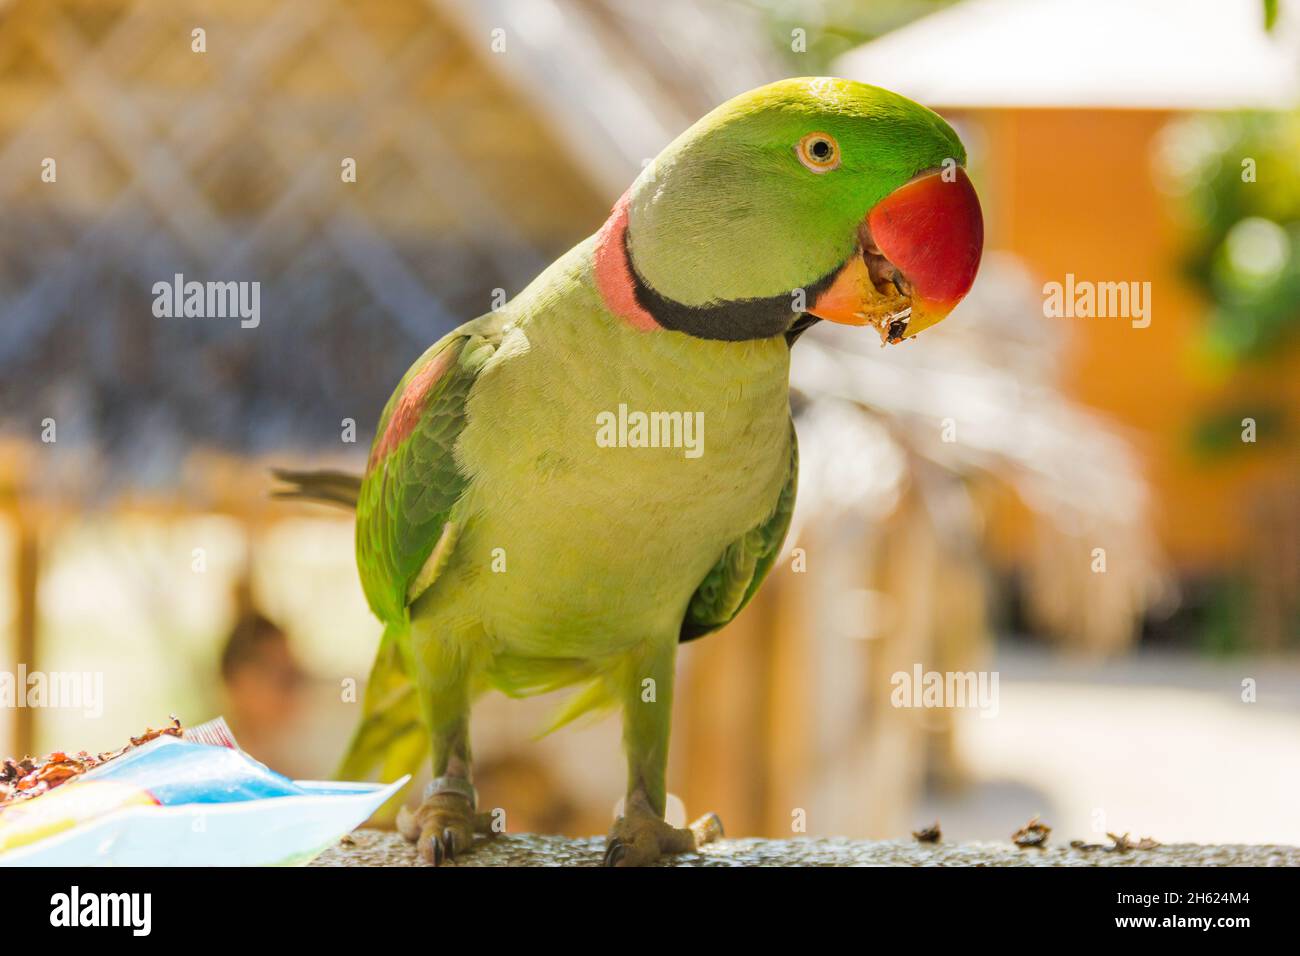 Parrot Food High Resolution Stock Photography and Images - Alamy